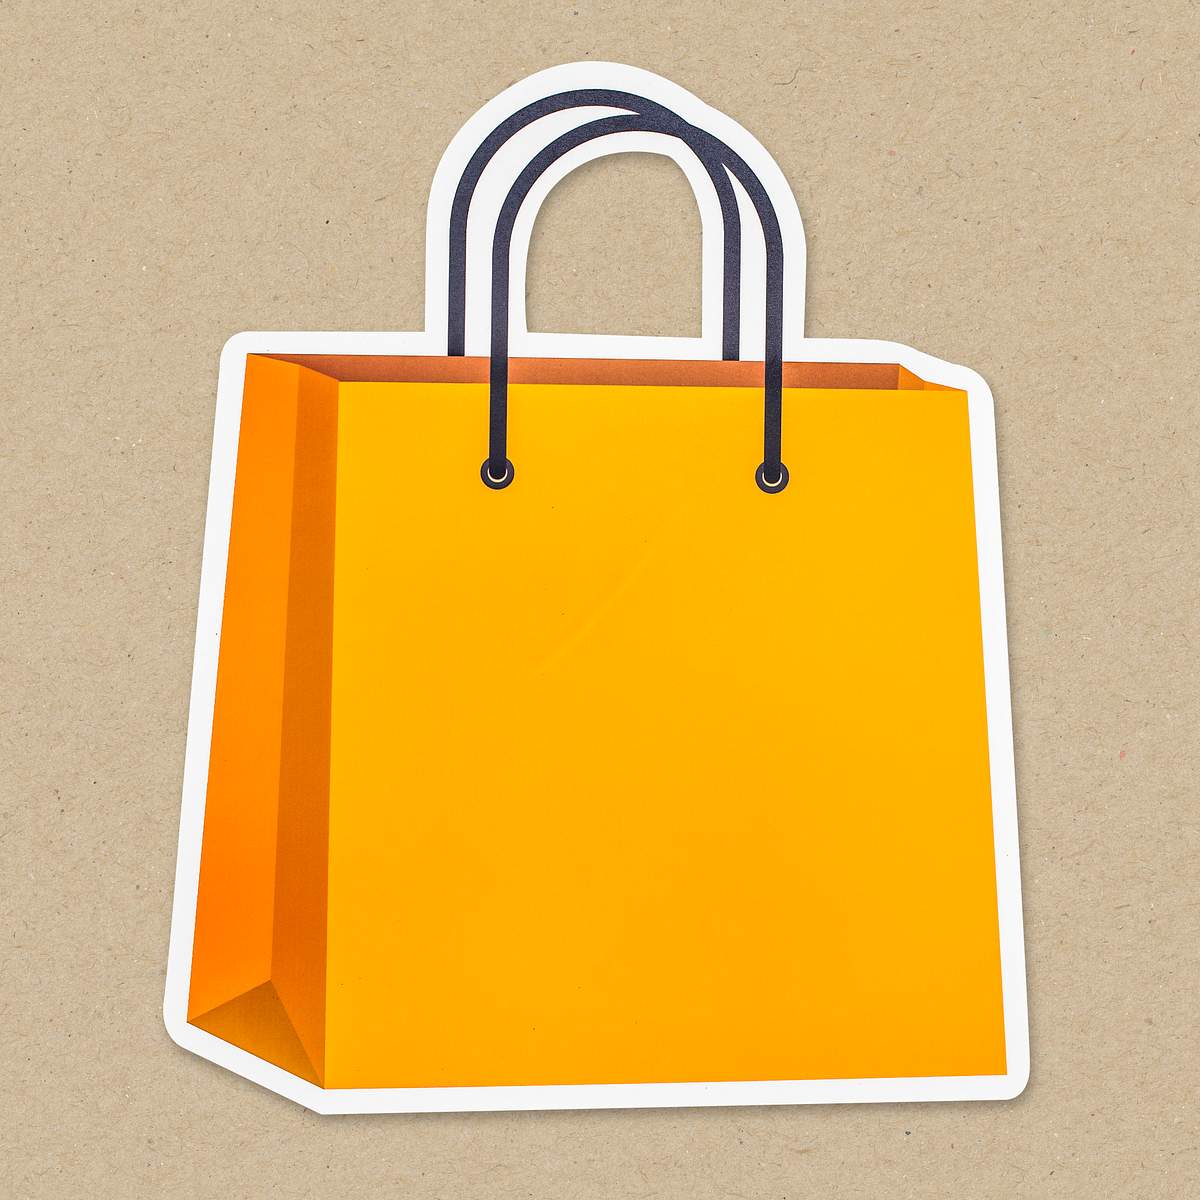 Download Yellow Shopping Bag Icon Isolated Free Photo 476604 Yellowimages Mockups